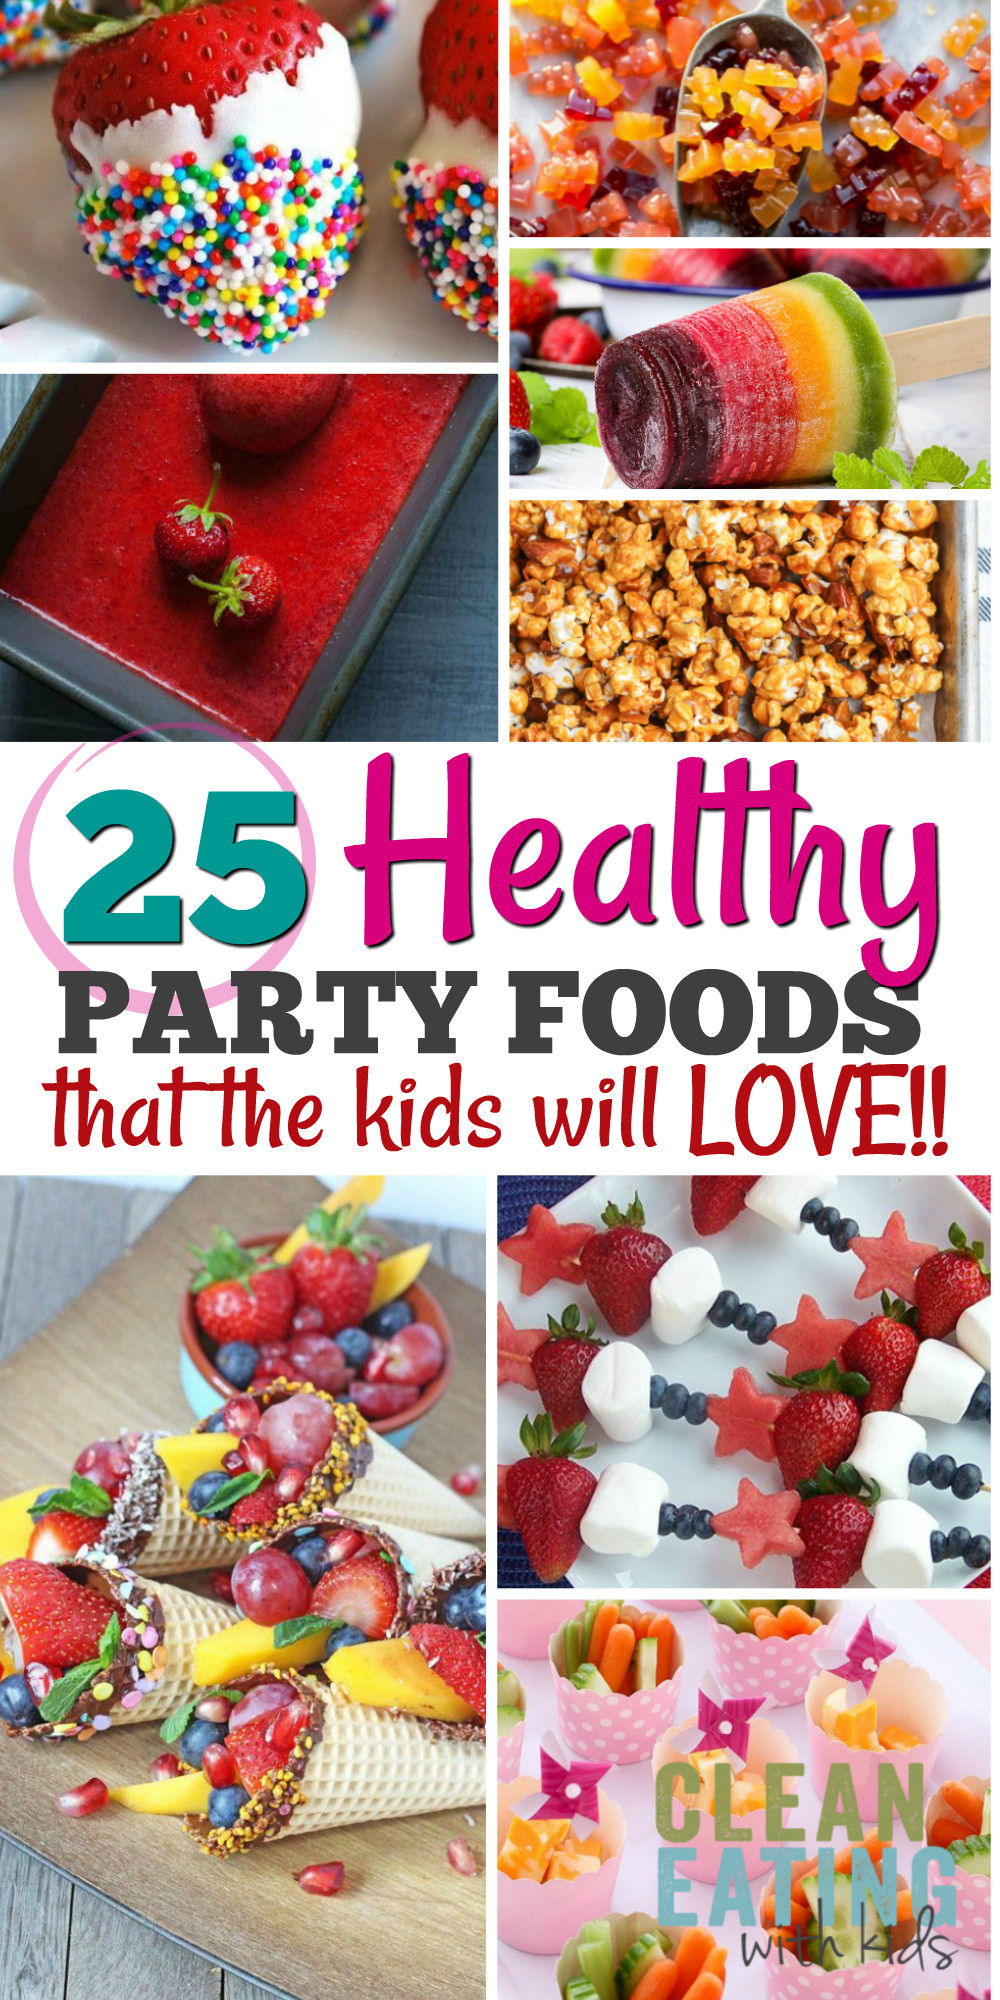 Ideas For Party Food
 25 Healthy Birthday Party Food Ideas Clean Eating with kids